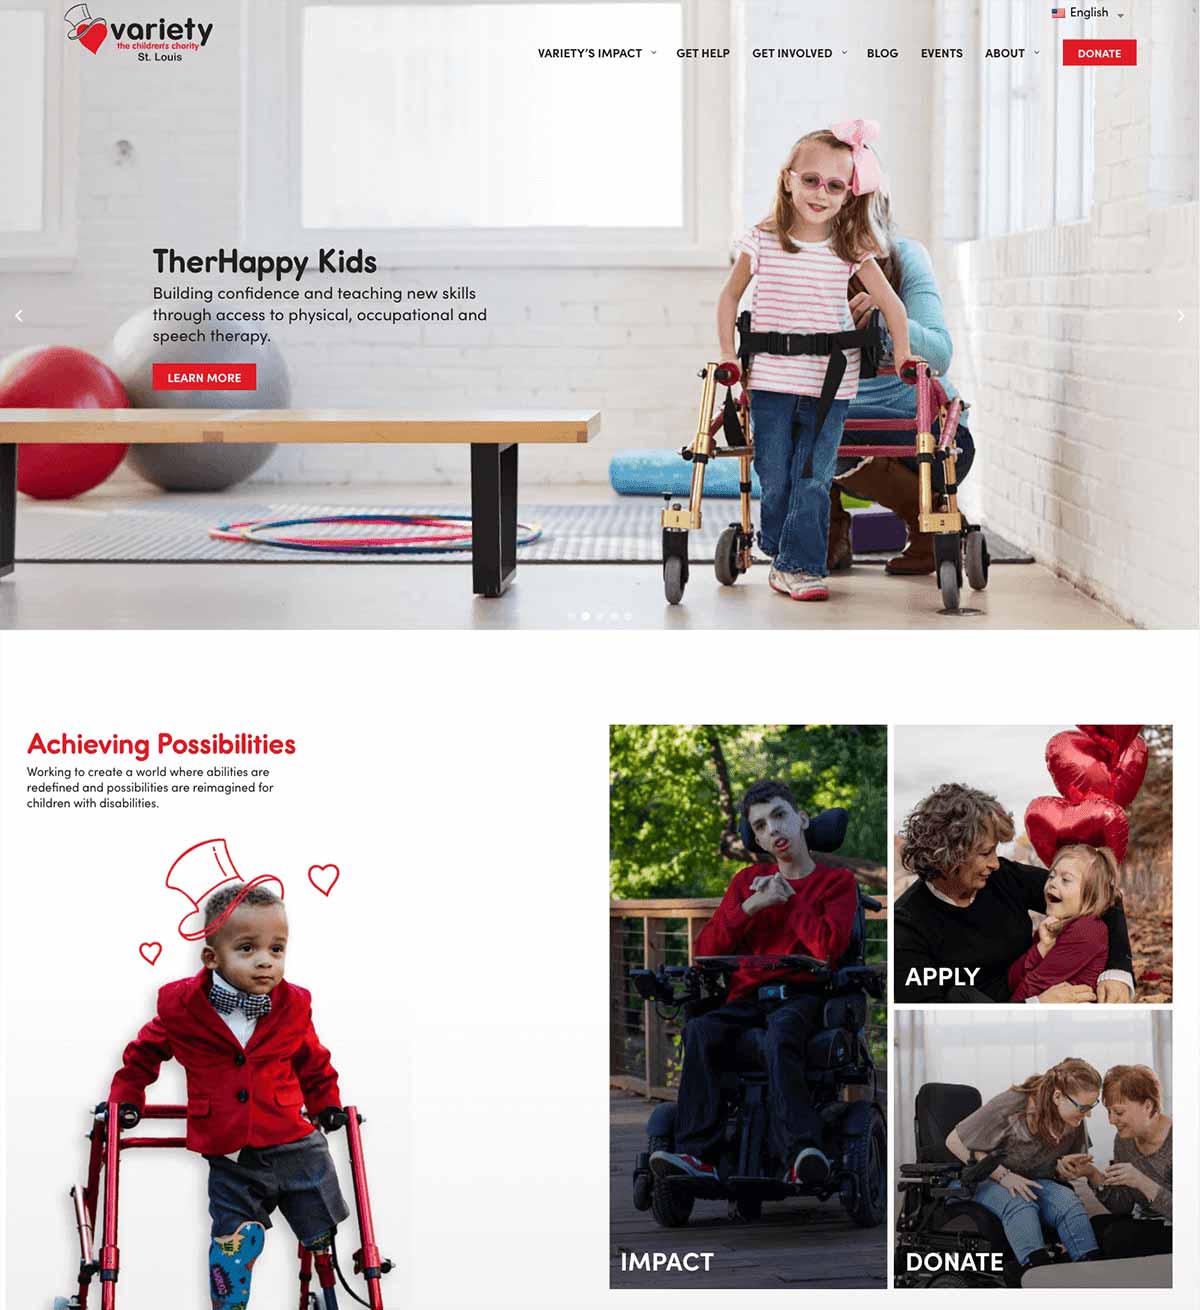 Variety’s nonprofit web design features lots of custom photography